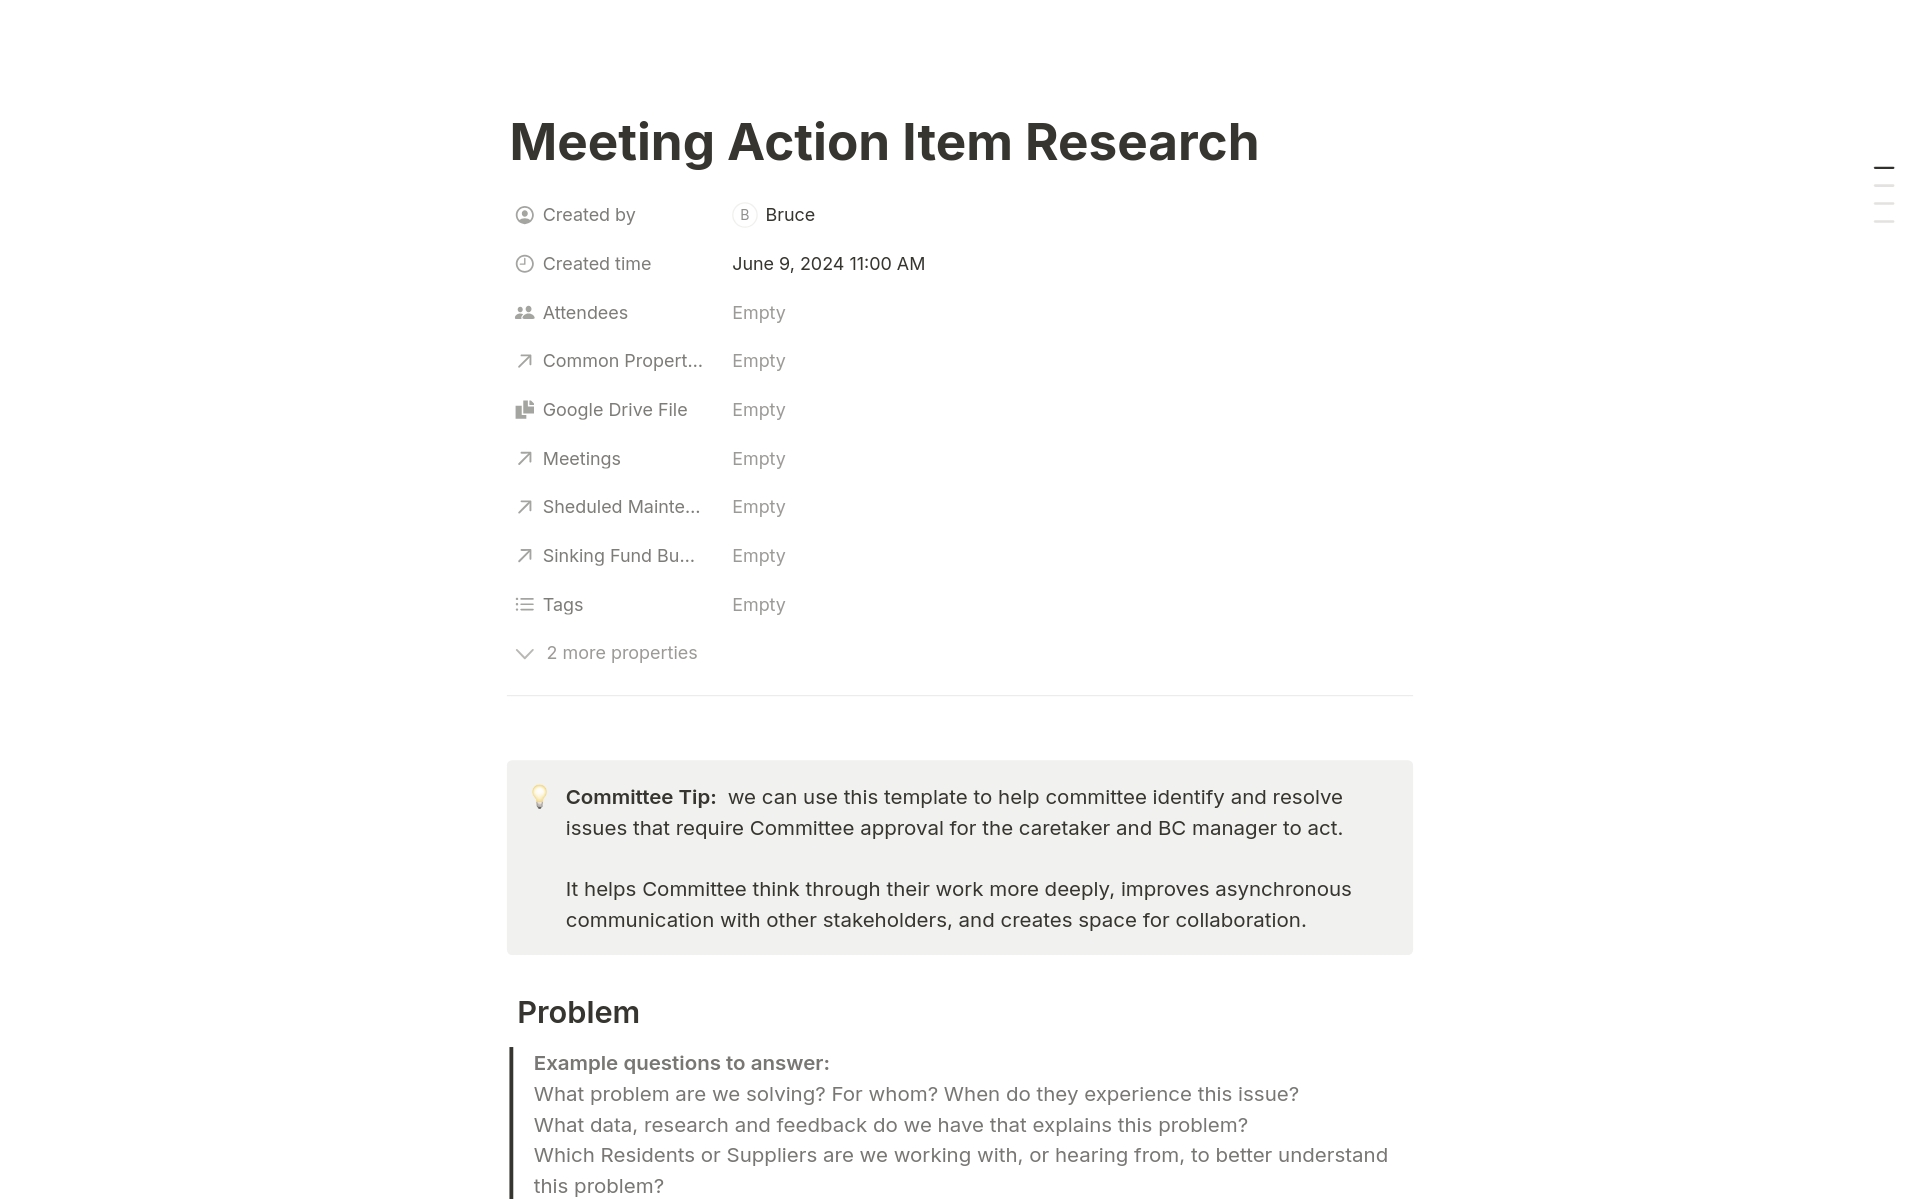 Projects or group meetings generate many action items. This template allows a team group identify the problem to solve and cycle through knowledge gained from research to identifying suppliers who can provide solutions and gather their quotes